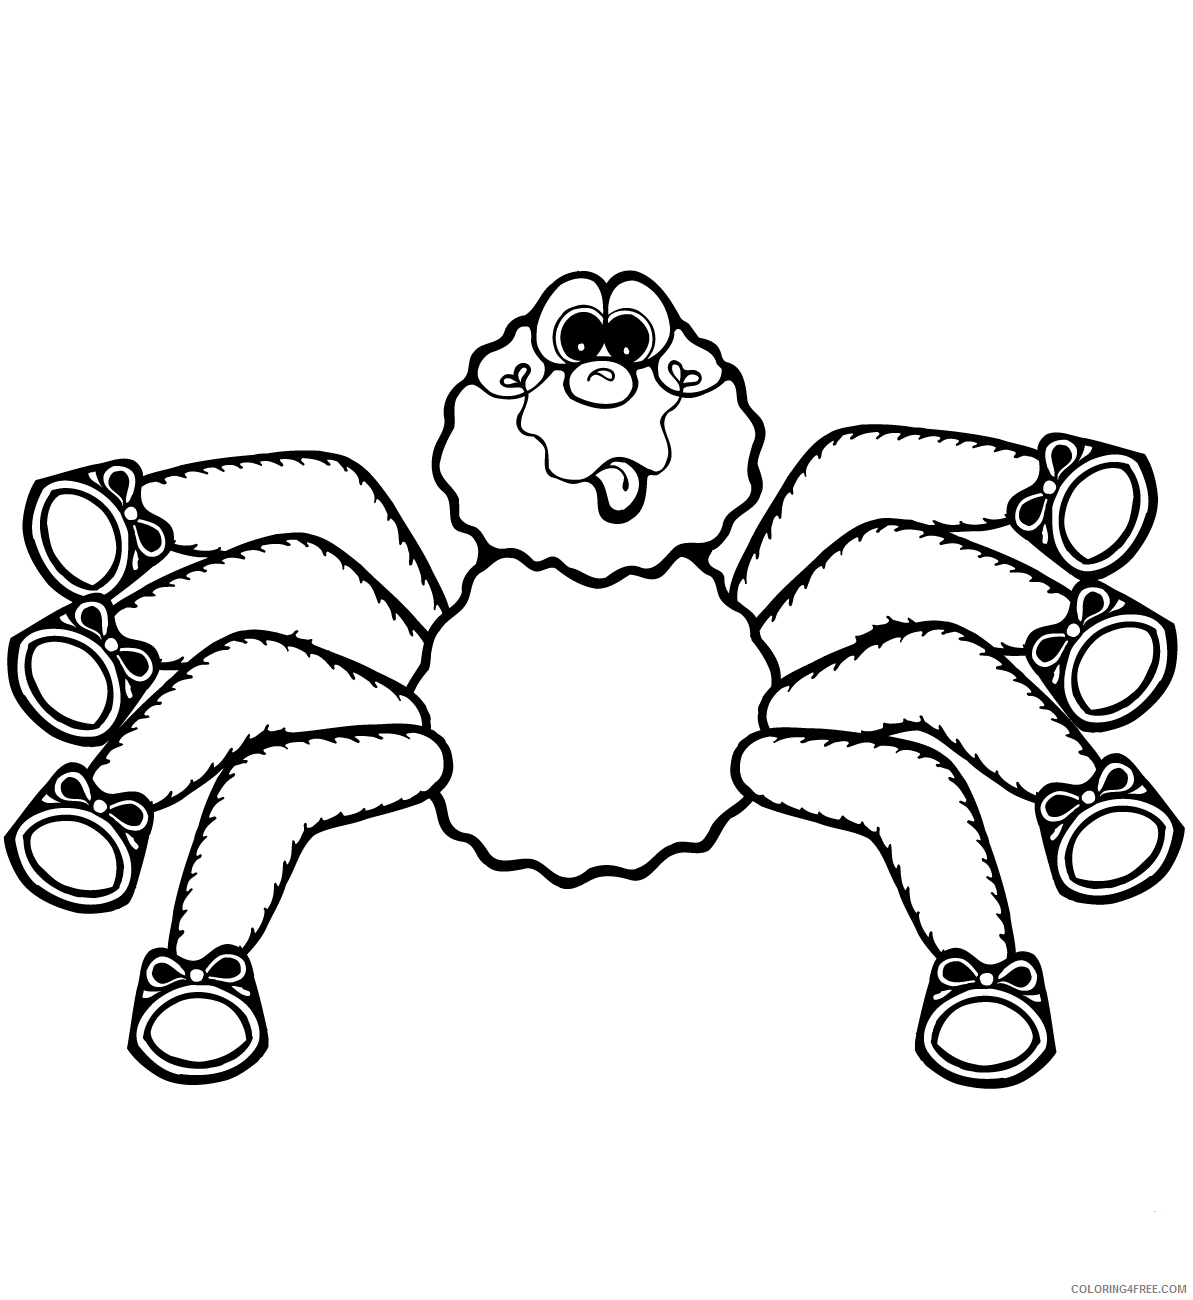 Spider Coloring Pages Animal Printable Sheets cartoon spider 1 2021 4612 Coloring4free